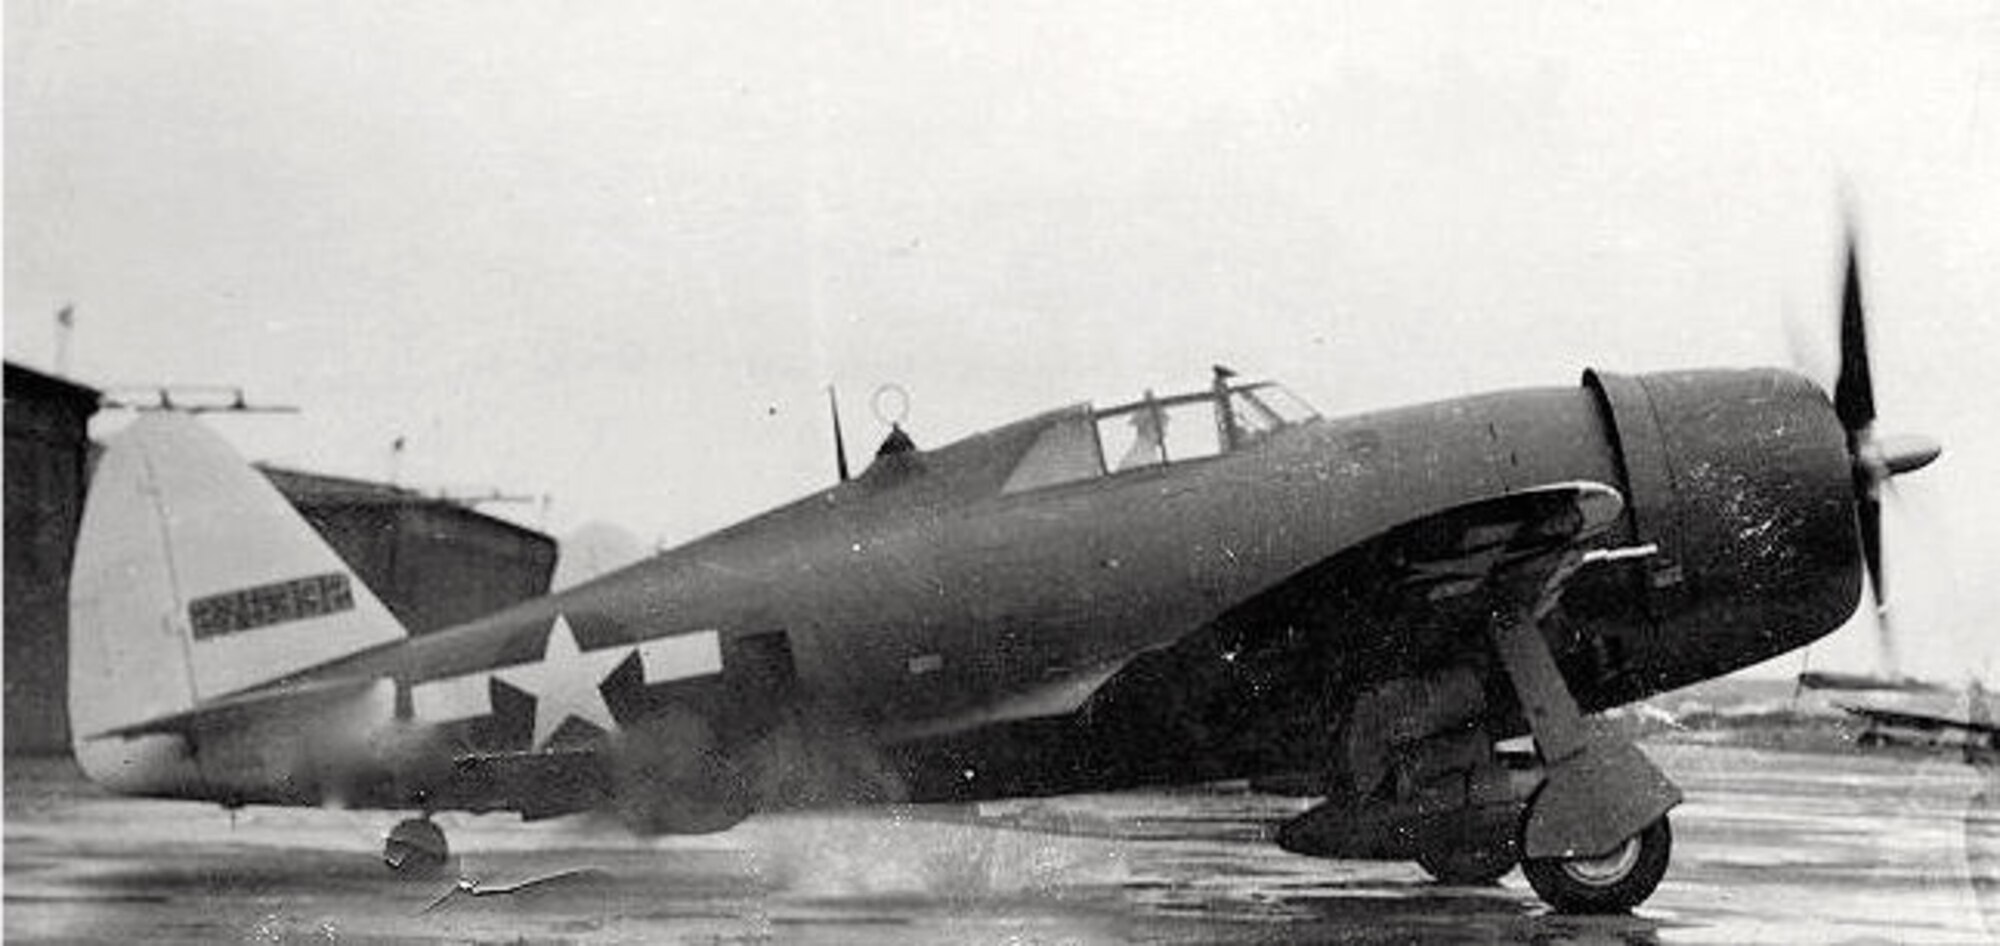 HOPD-P-47D Serial Number 42-735332 of the 348th FG, New Guinea, 1943. Kearby's Thunderbolts: The 348th Fighter Group in World War II.
 Schiffer Publishing. ISBN: 0764302485 (Photo by USAF Historical Research Agency, Maxwell AFB, Alabama via Steaaway, John C. (1997))